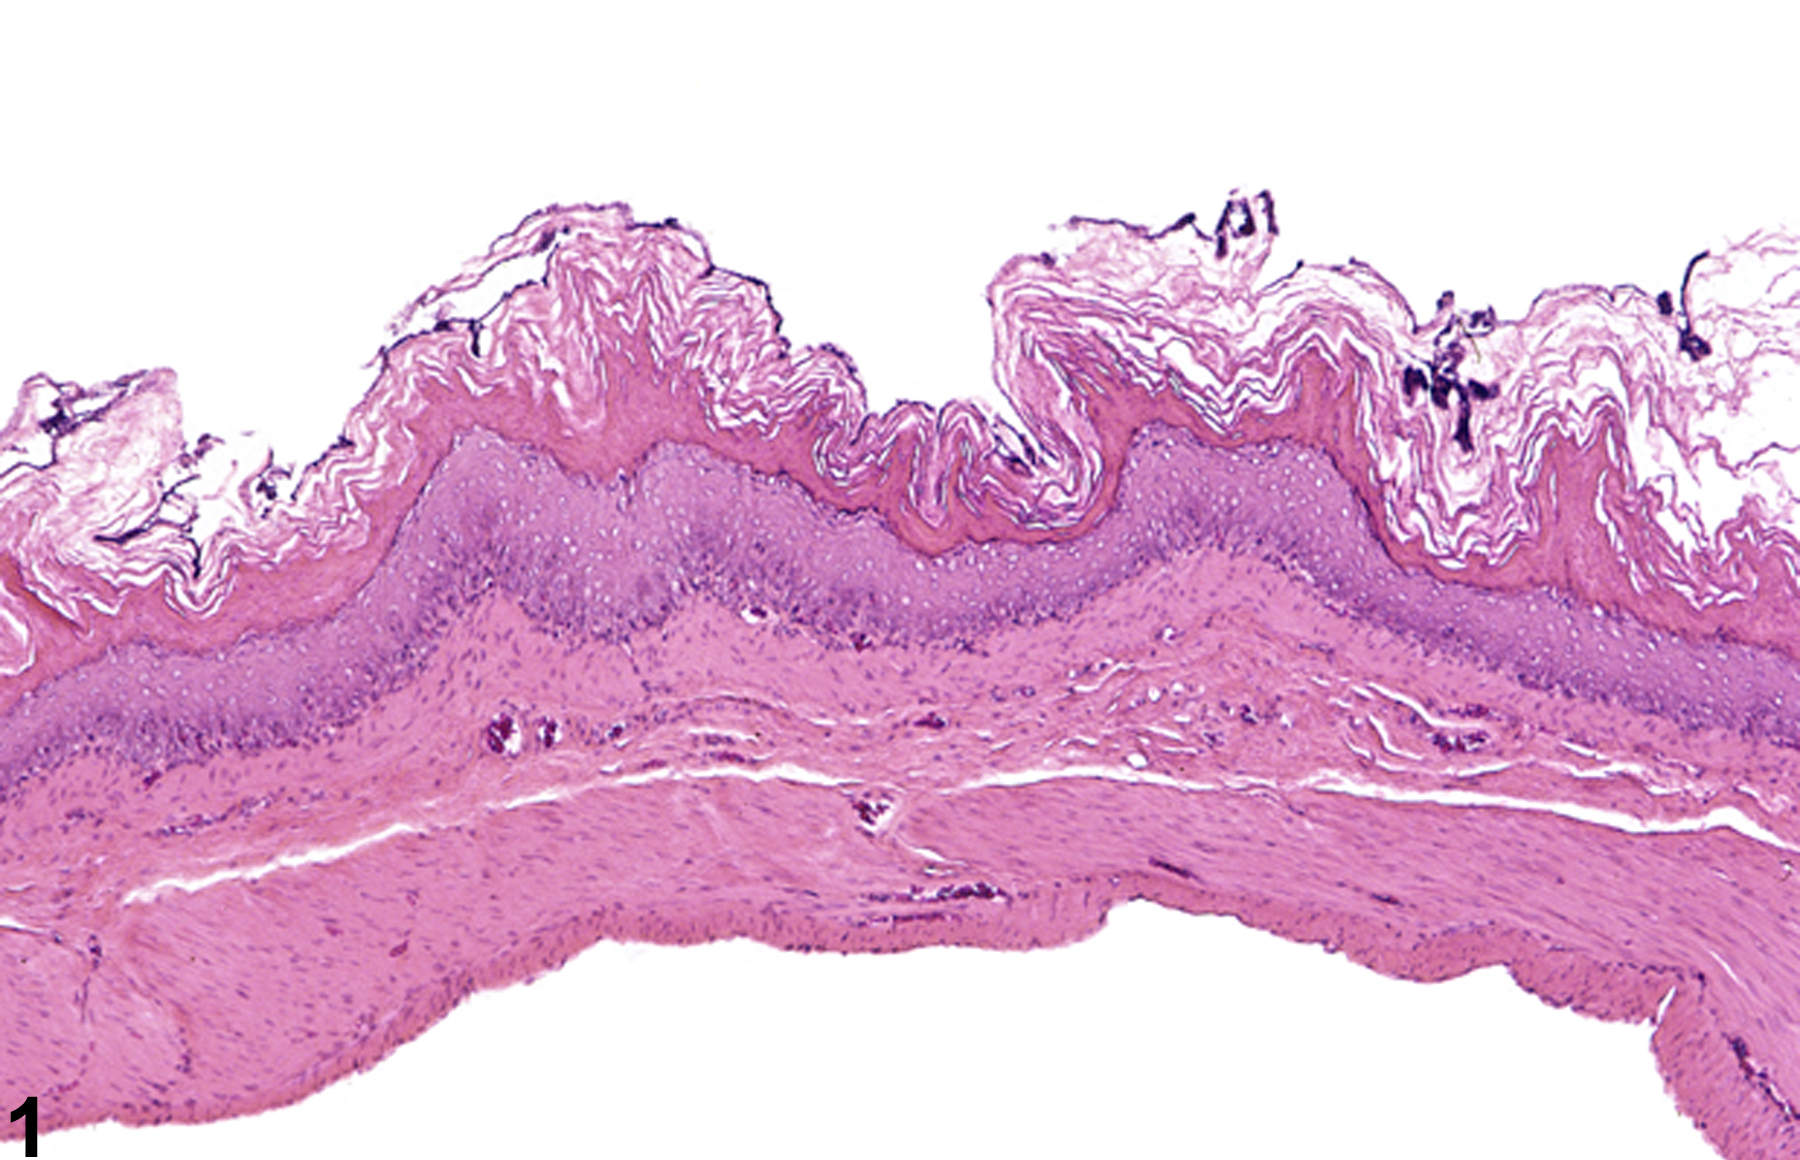 Image of hyperplasia (focal, diffuse) in the forestomach epithelium from a male F344/N rat in a subchronic study